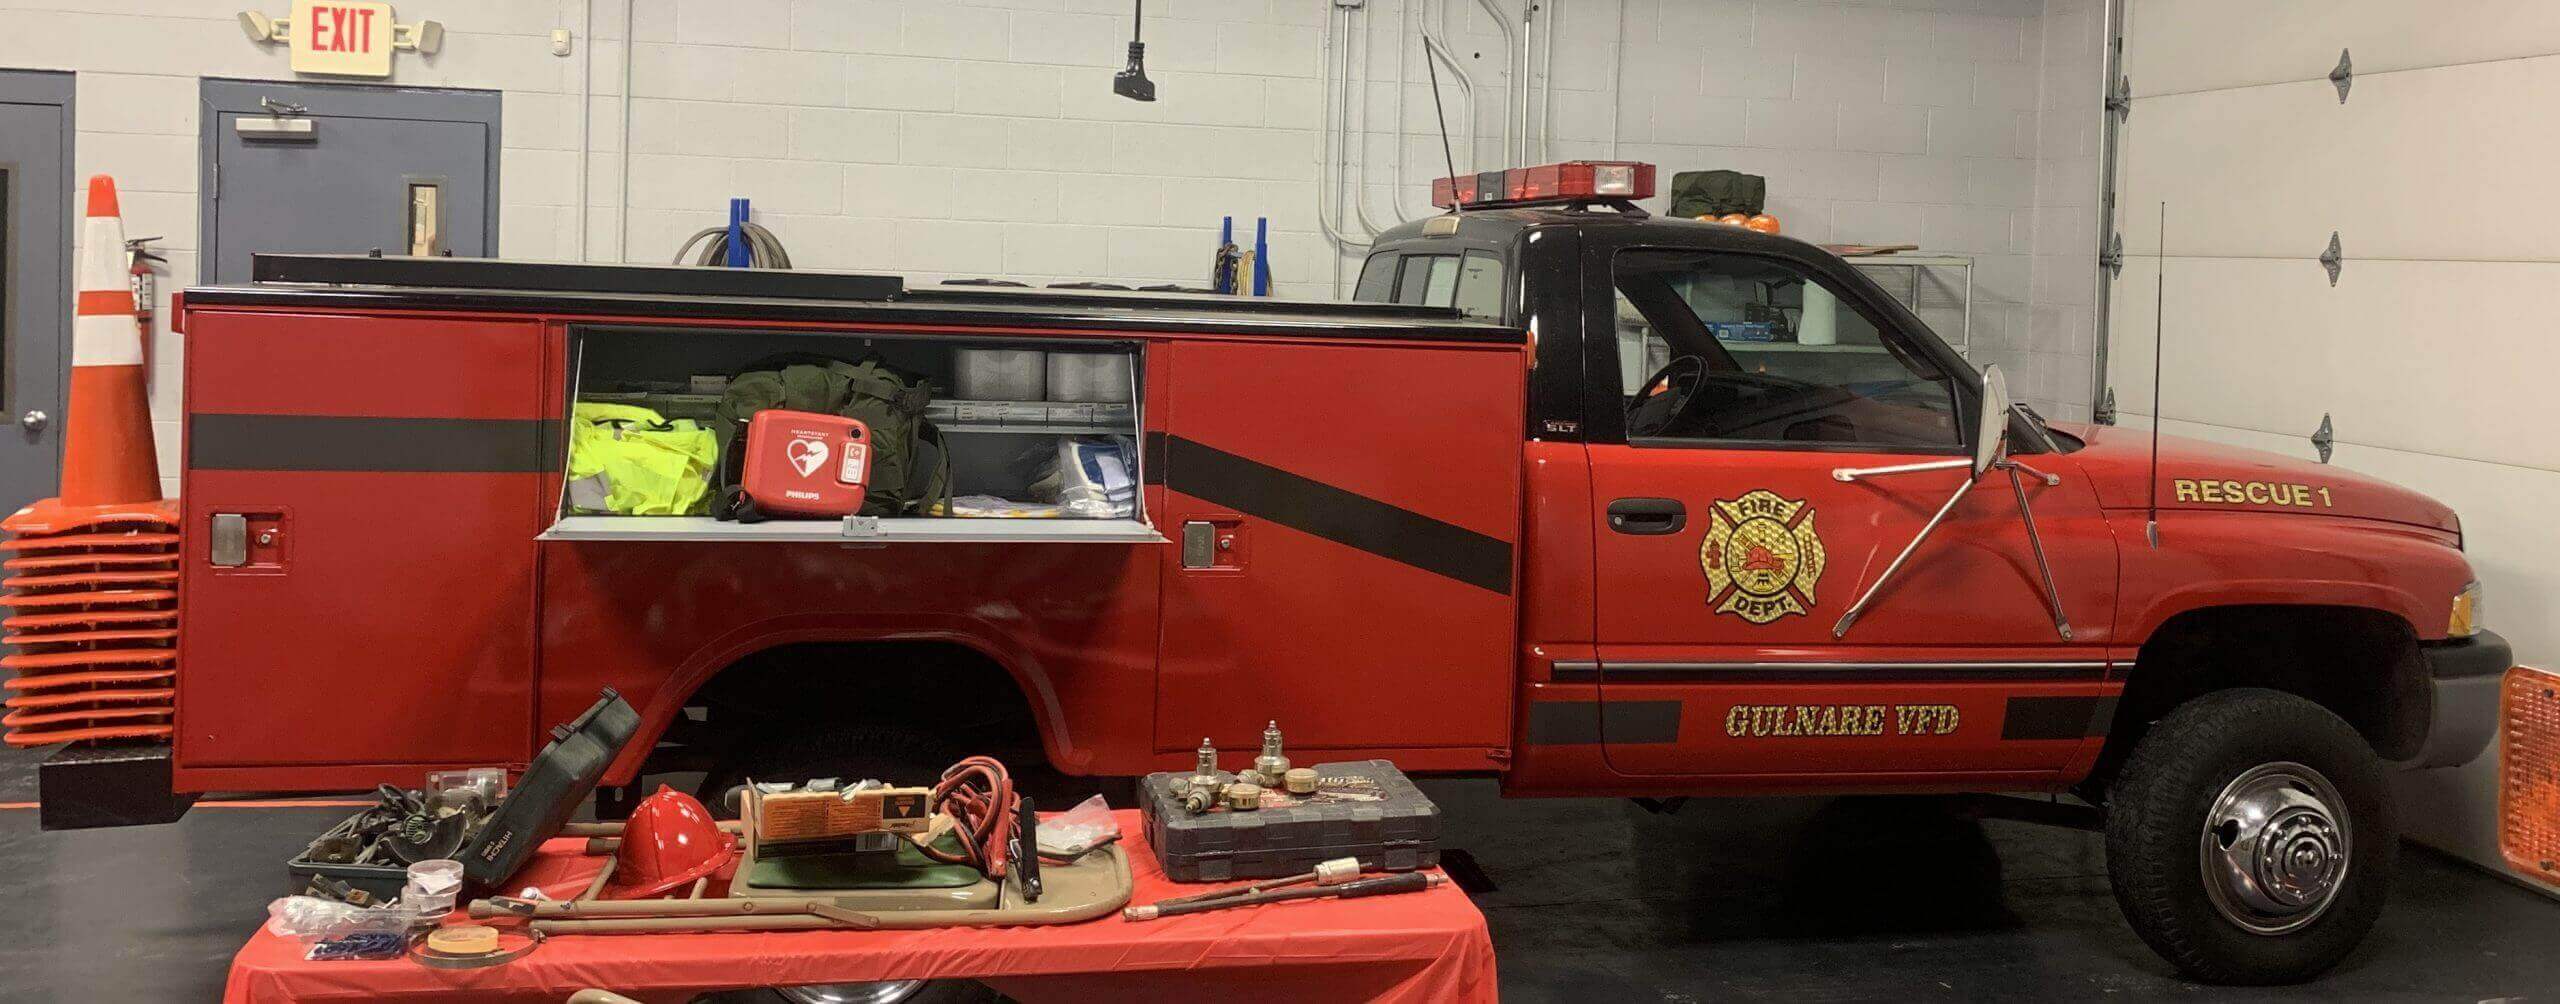 Truck with AED donated to Gulnare Fire Department by AED.us